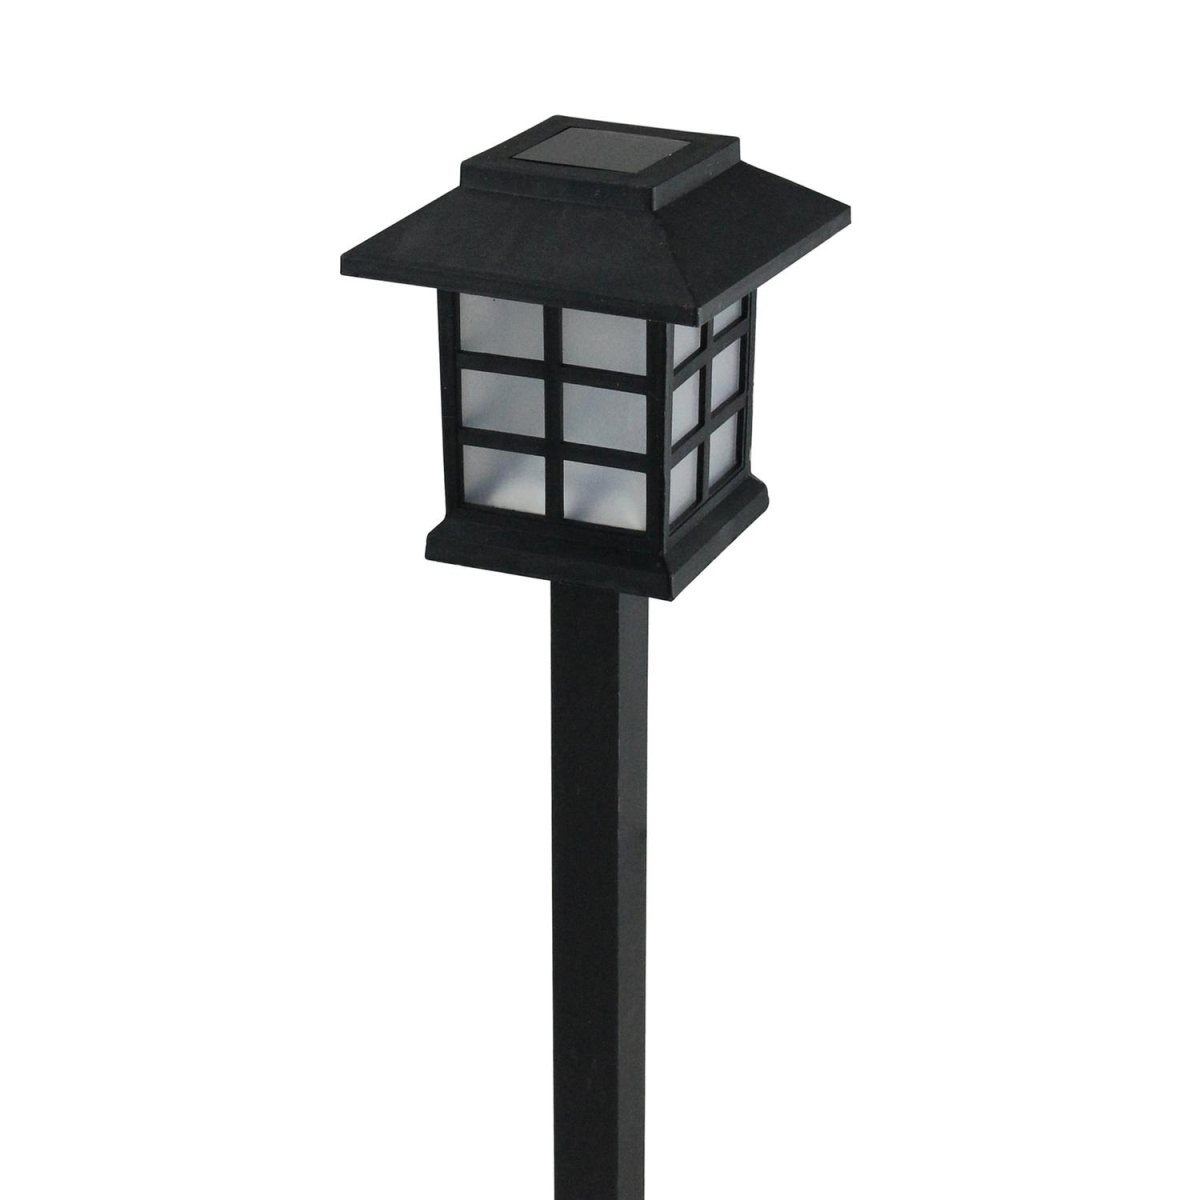 32804232 11.25 In. Chinese Lanterns Solar Light With White Led Light & Lawn Stake - Black